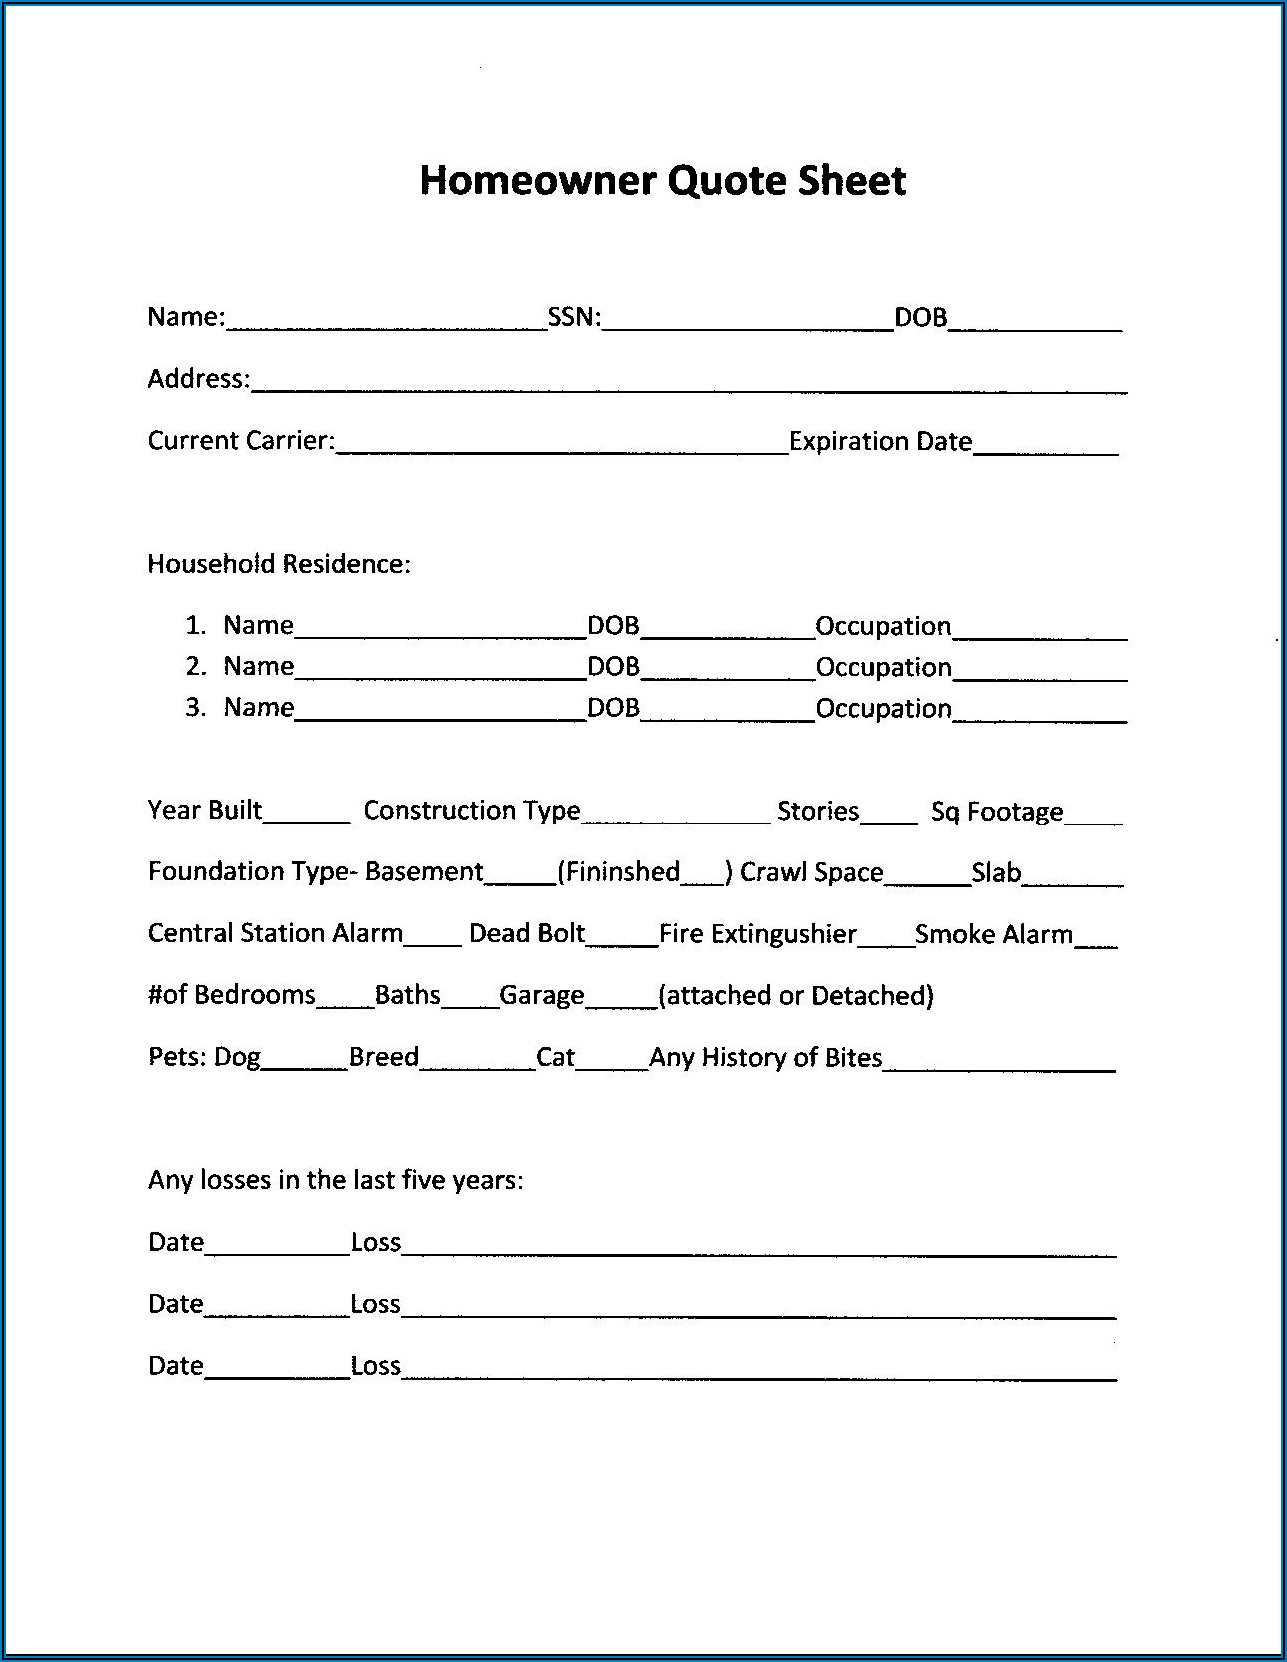 Homeowners Insurance Quote Sheet Template